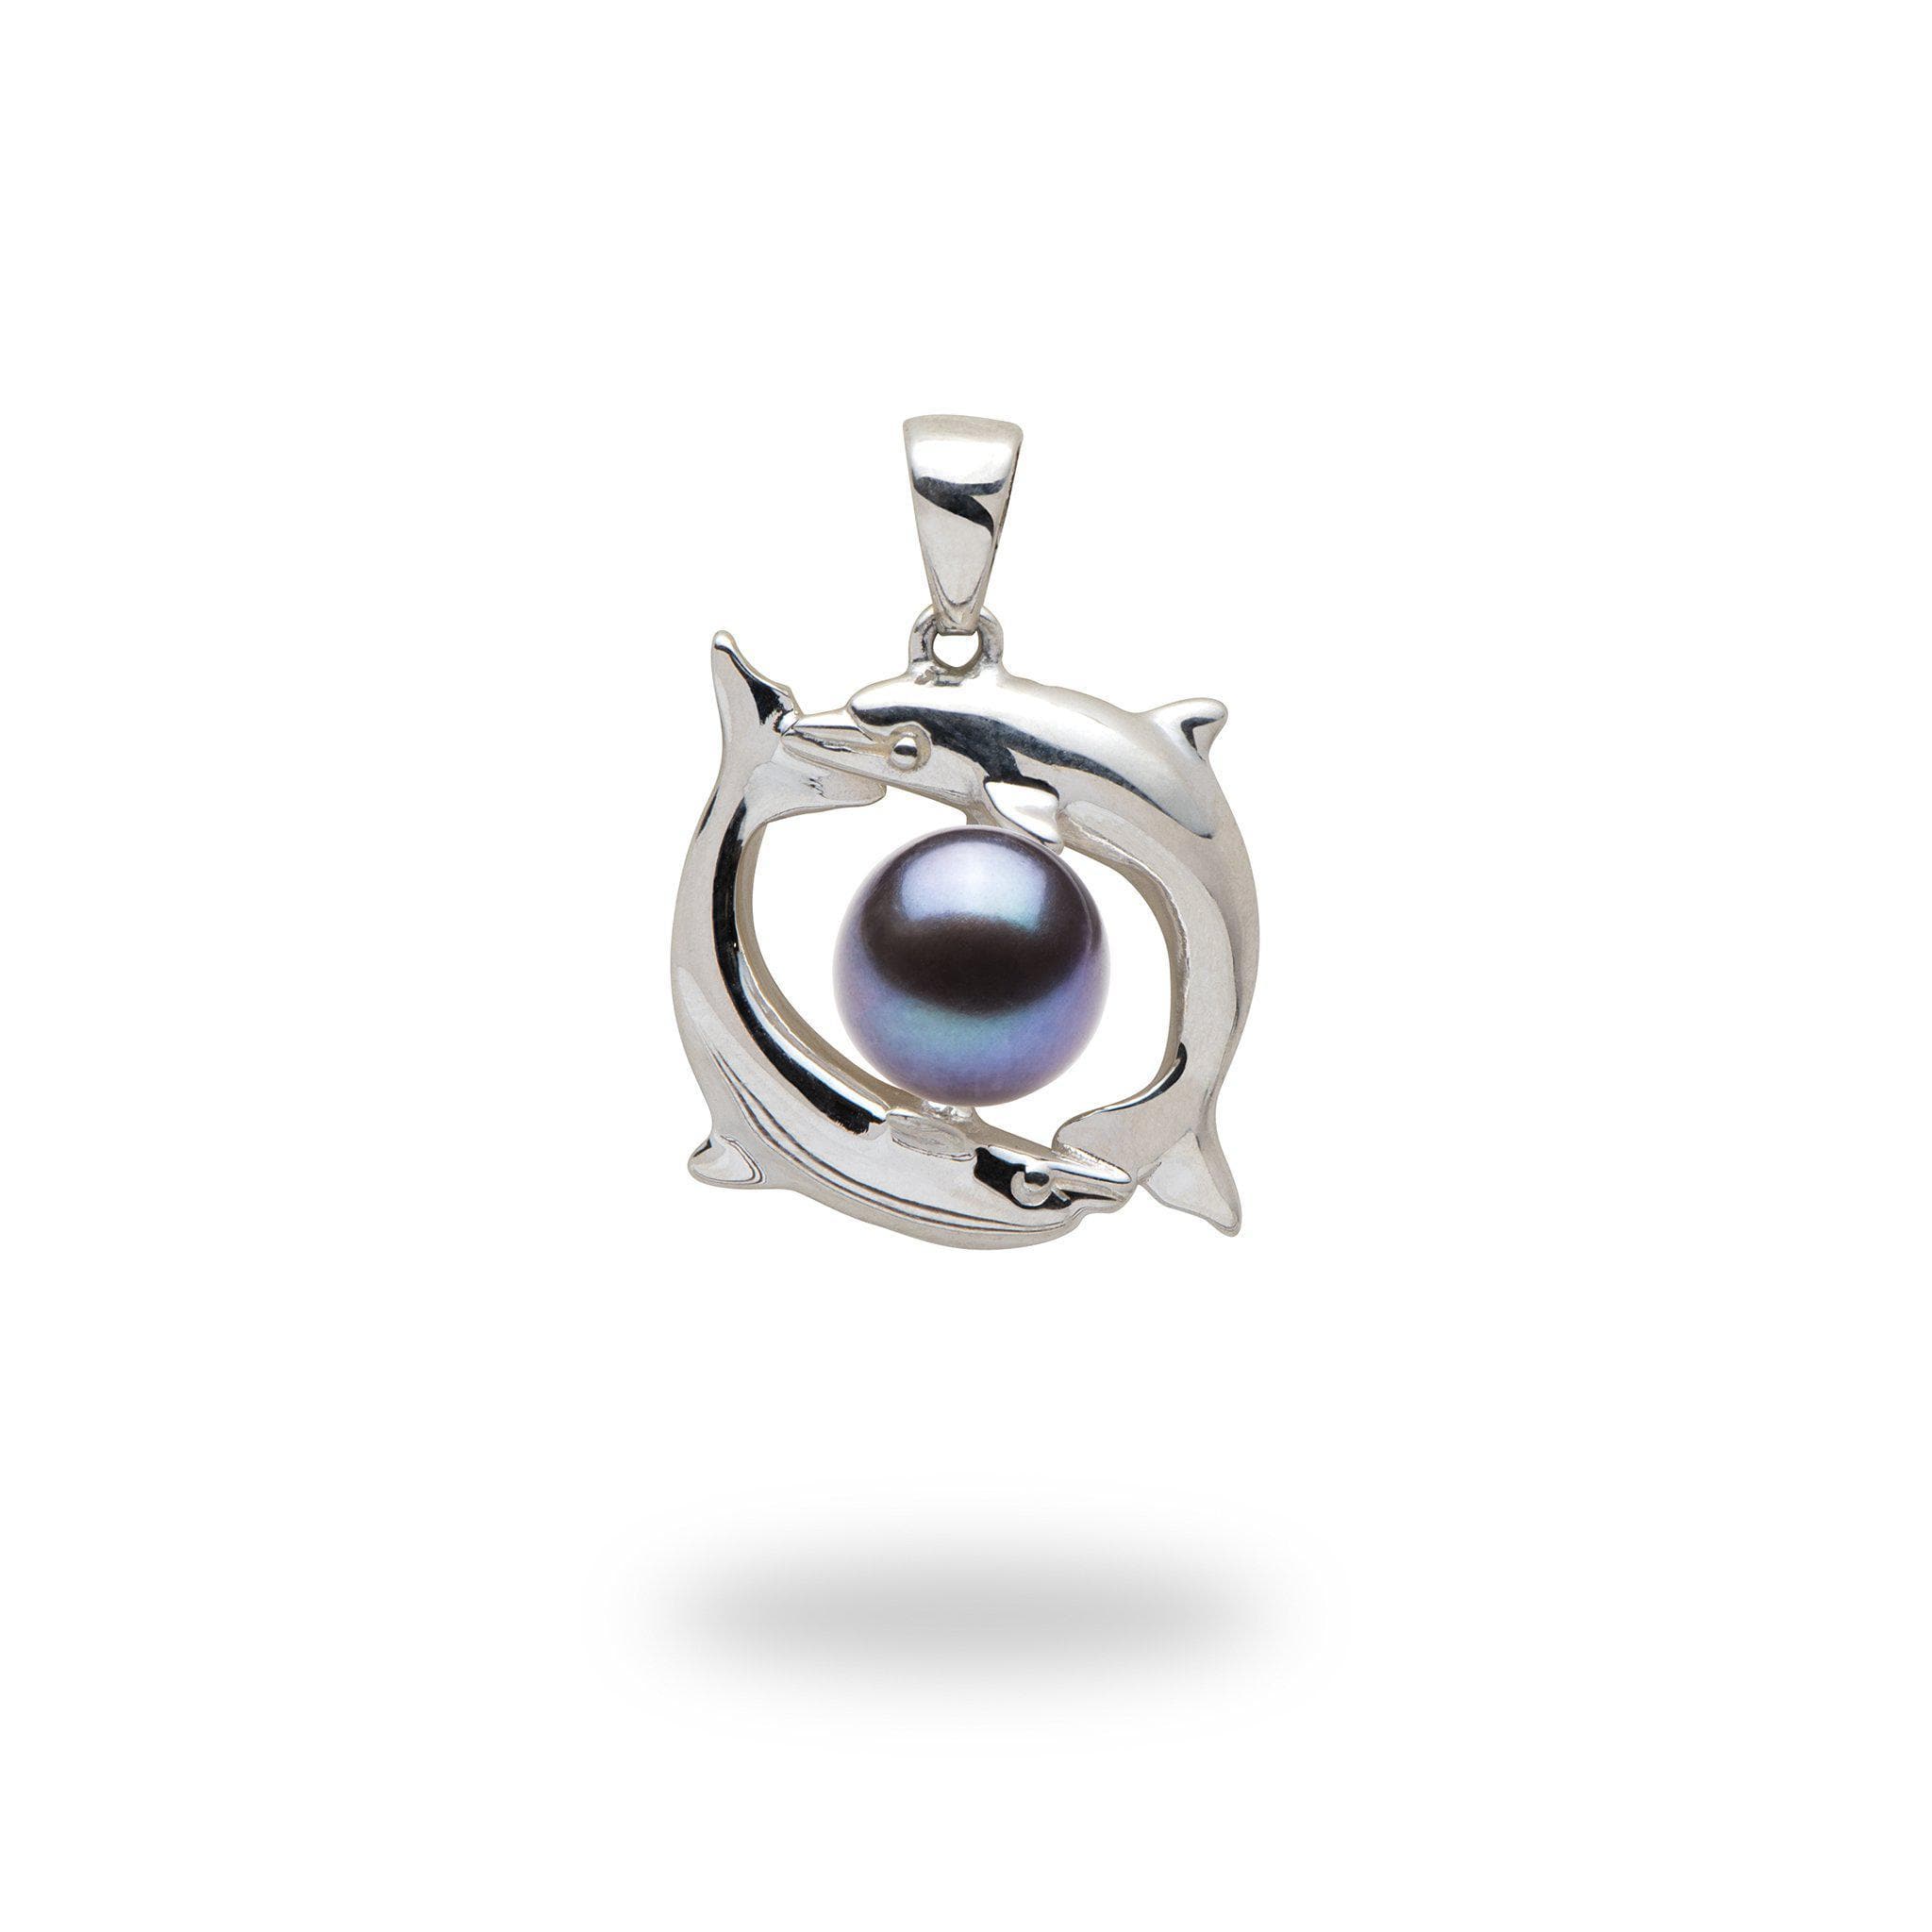 Pick-a-Pearl Circling Dolphins Pendant in Sterling Silver with Tahitian Black Pearl  - Maui Divers Jewelry